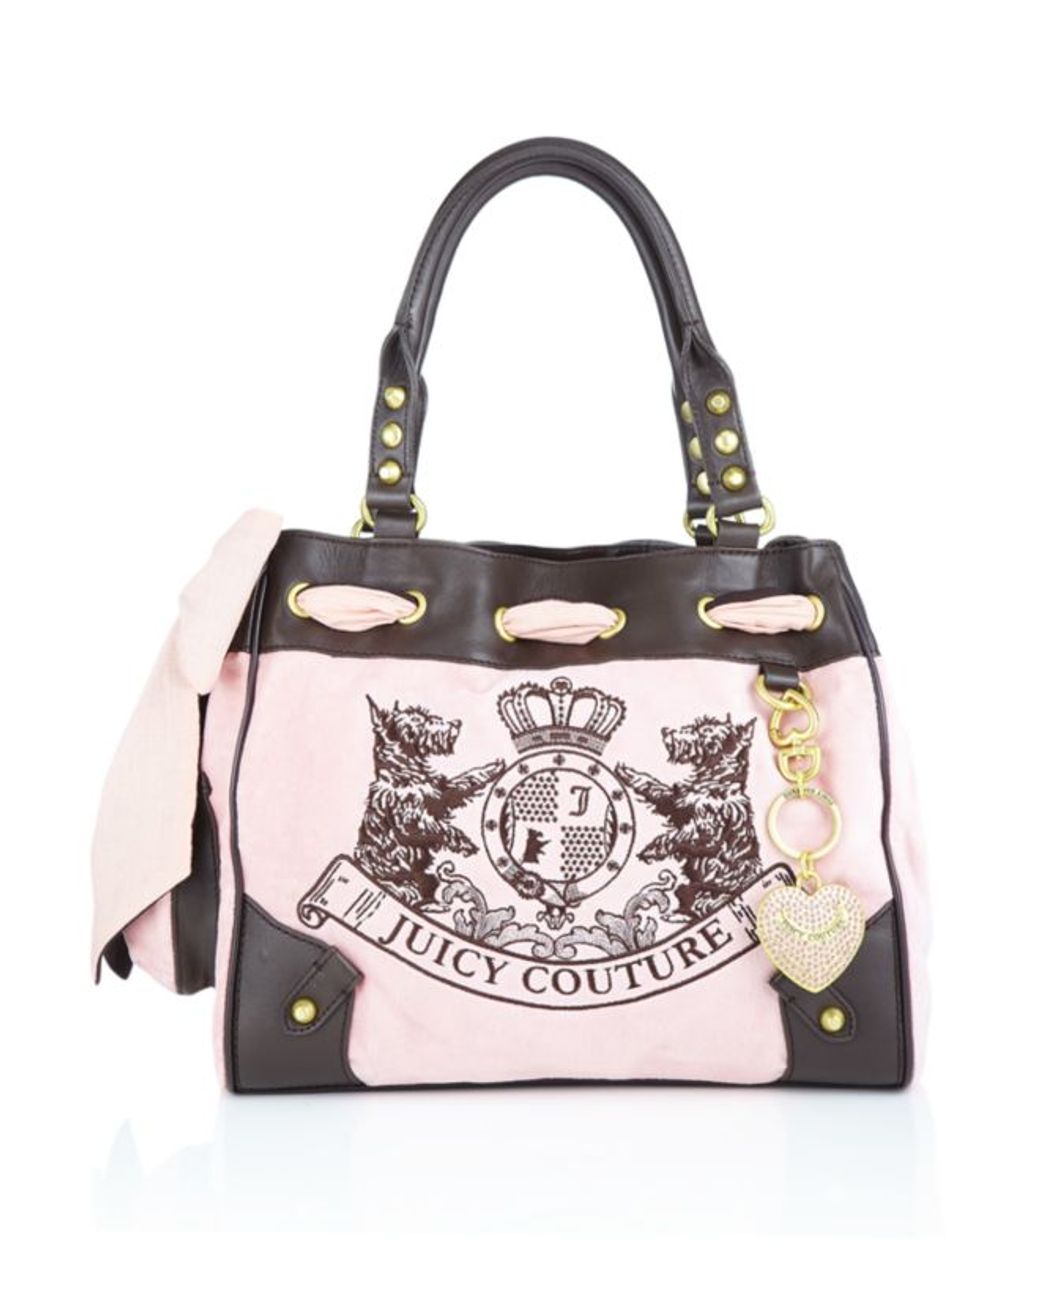 Discover more than 137 juicy couture daydreamer bag super hot ...